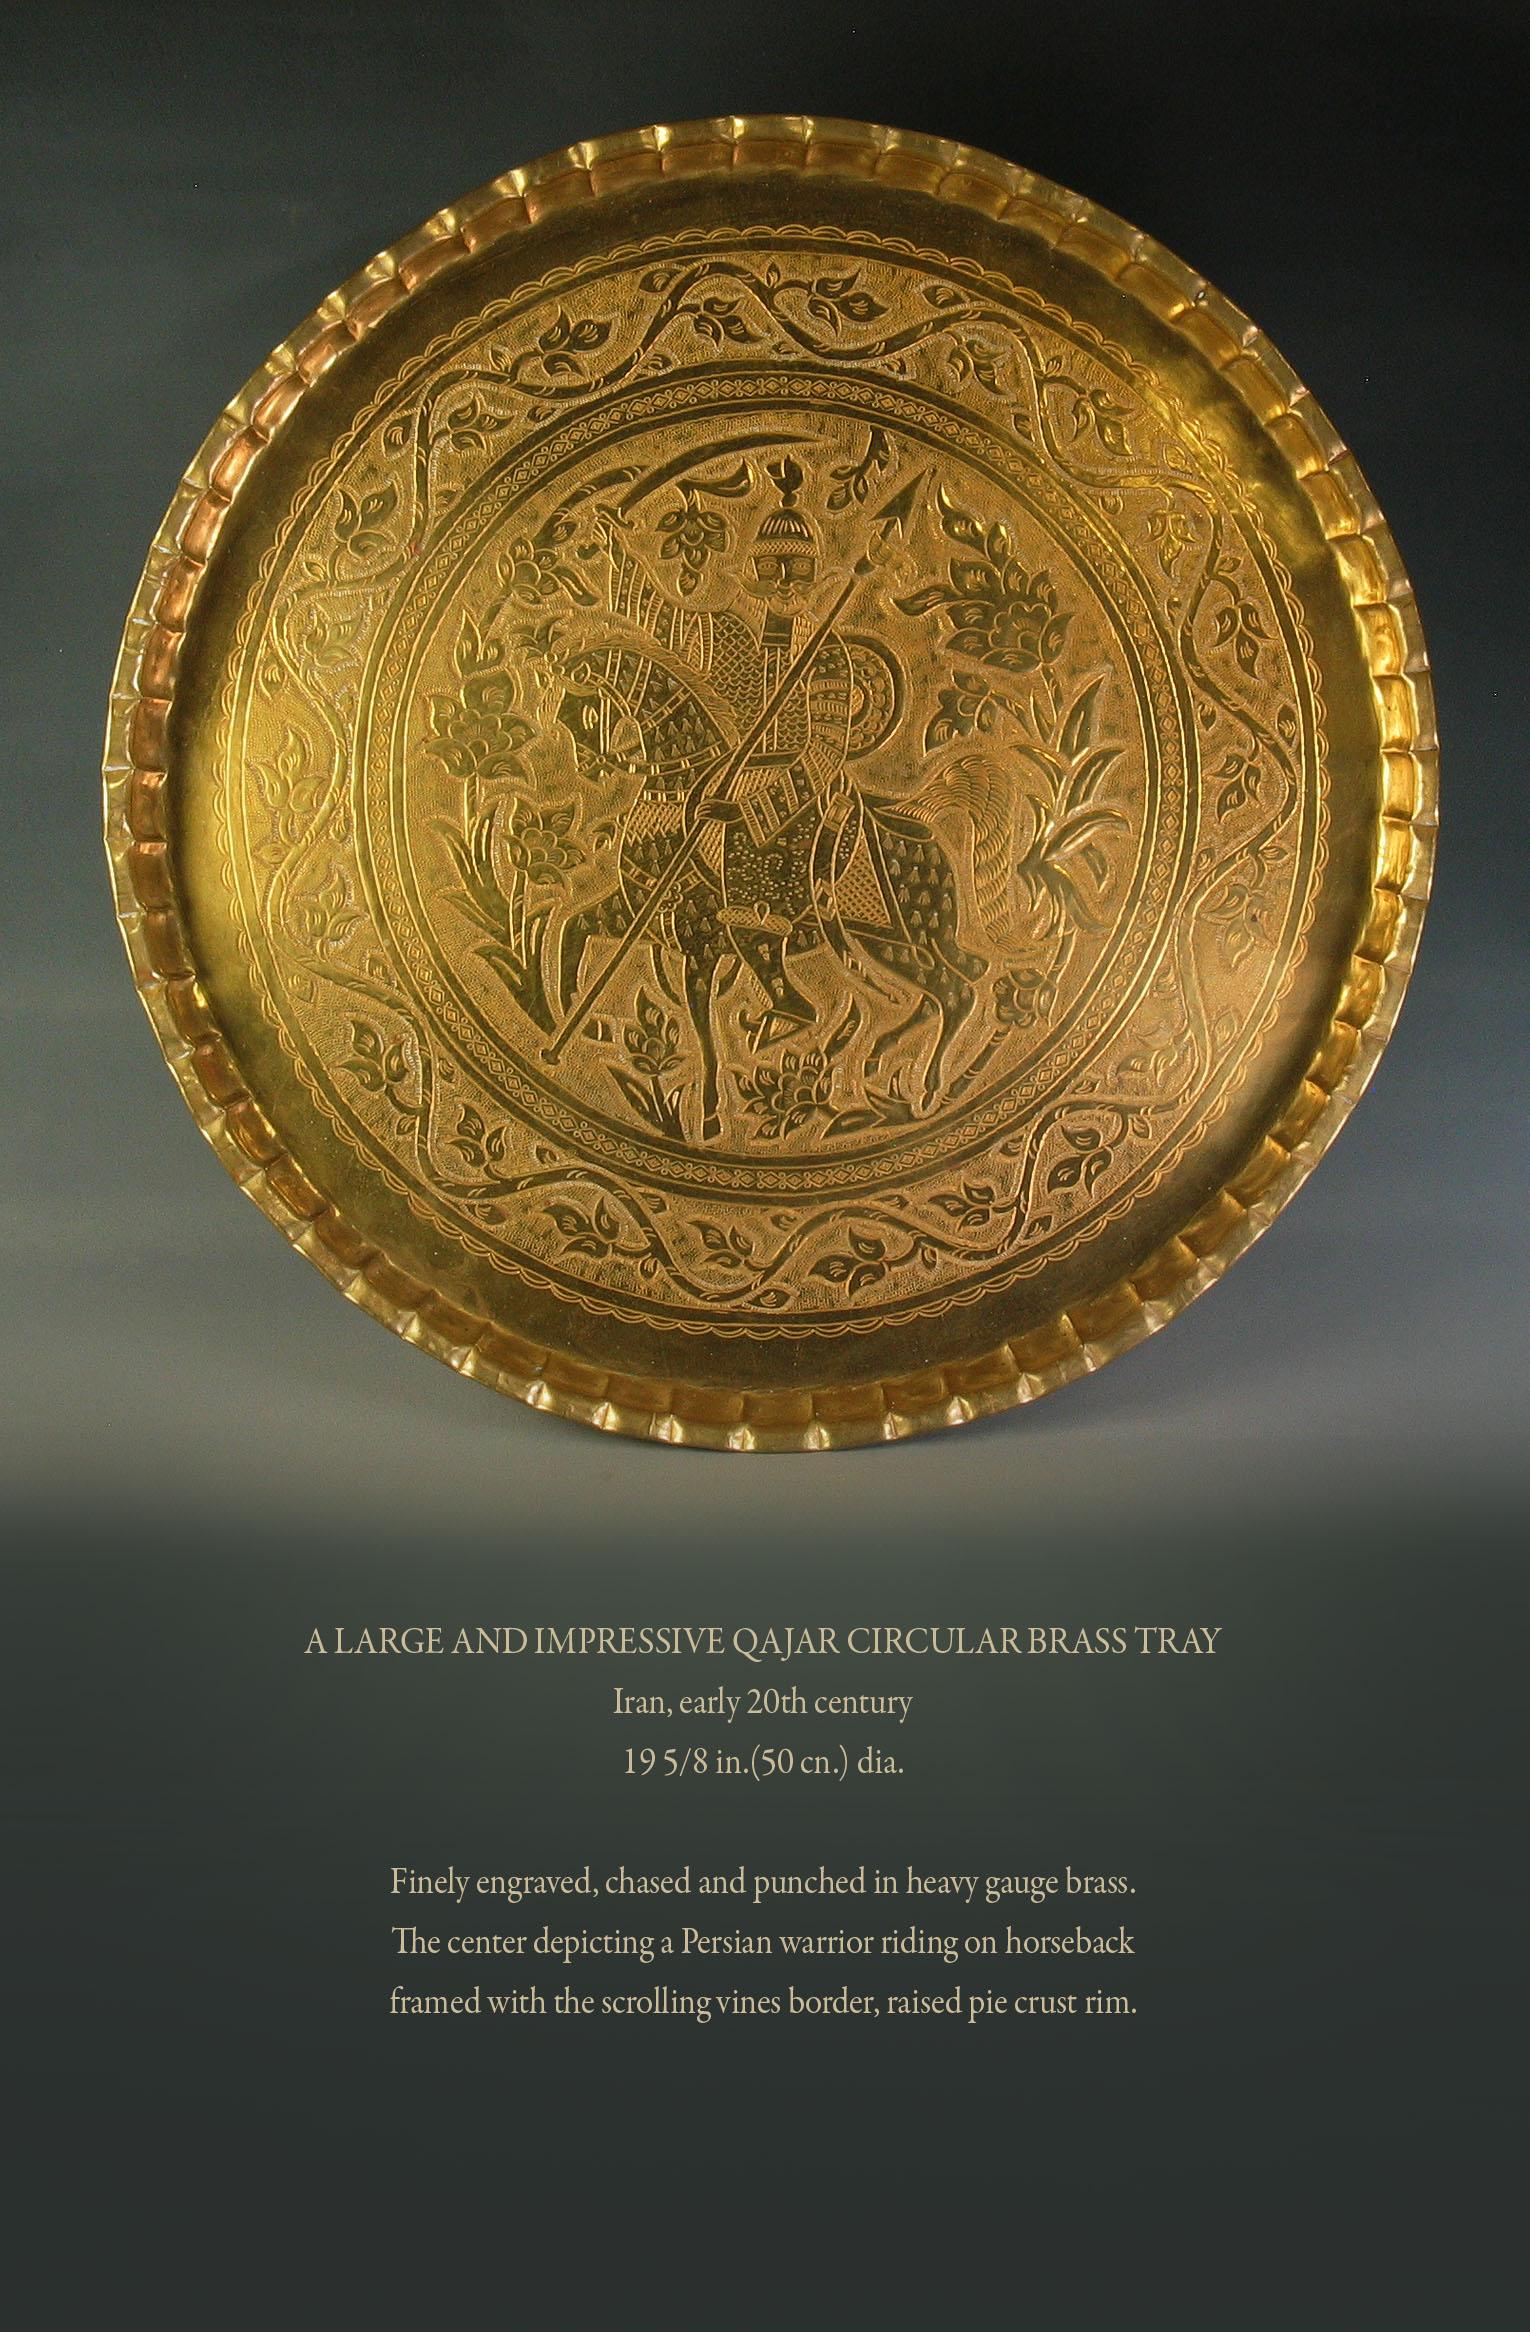 A large and impressive Qajar circular brass tray,
Iran, early 20th century.
Measures: 19 5/8 in. (50 cm.) diameter.

Finely engraved, chased and punched in heavy gauge brass.
The center depicting a Persian warrior riding on horseback
framed